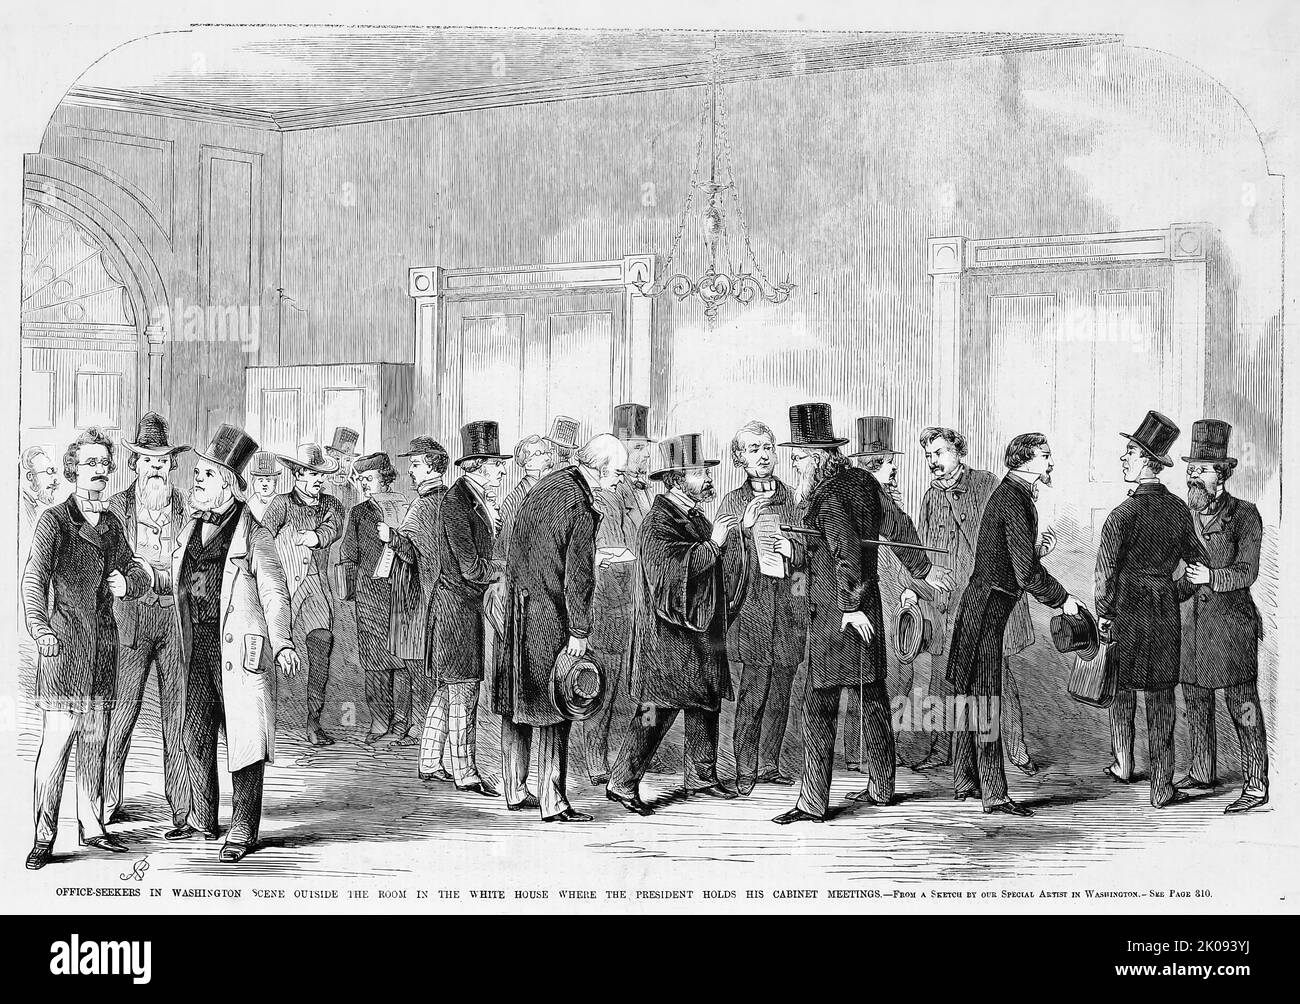 Office seekers in Washington scene outside the room in the White House where President Abraham Lincoln holds his Cabinet meetings (1861). 19th century illustration from Frank Leslie's Illustrated Newspaper Stock Photo